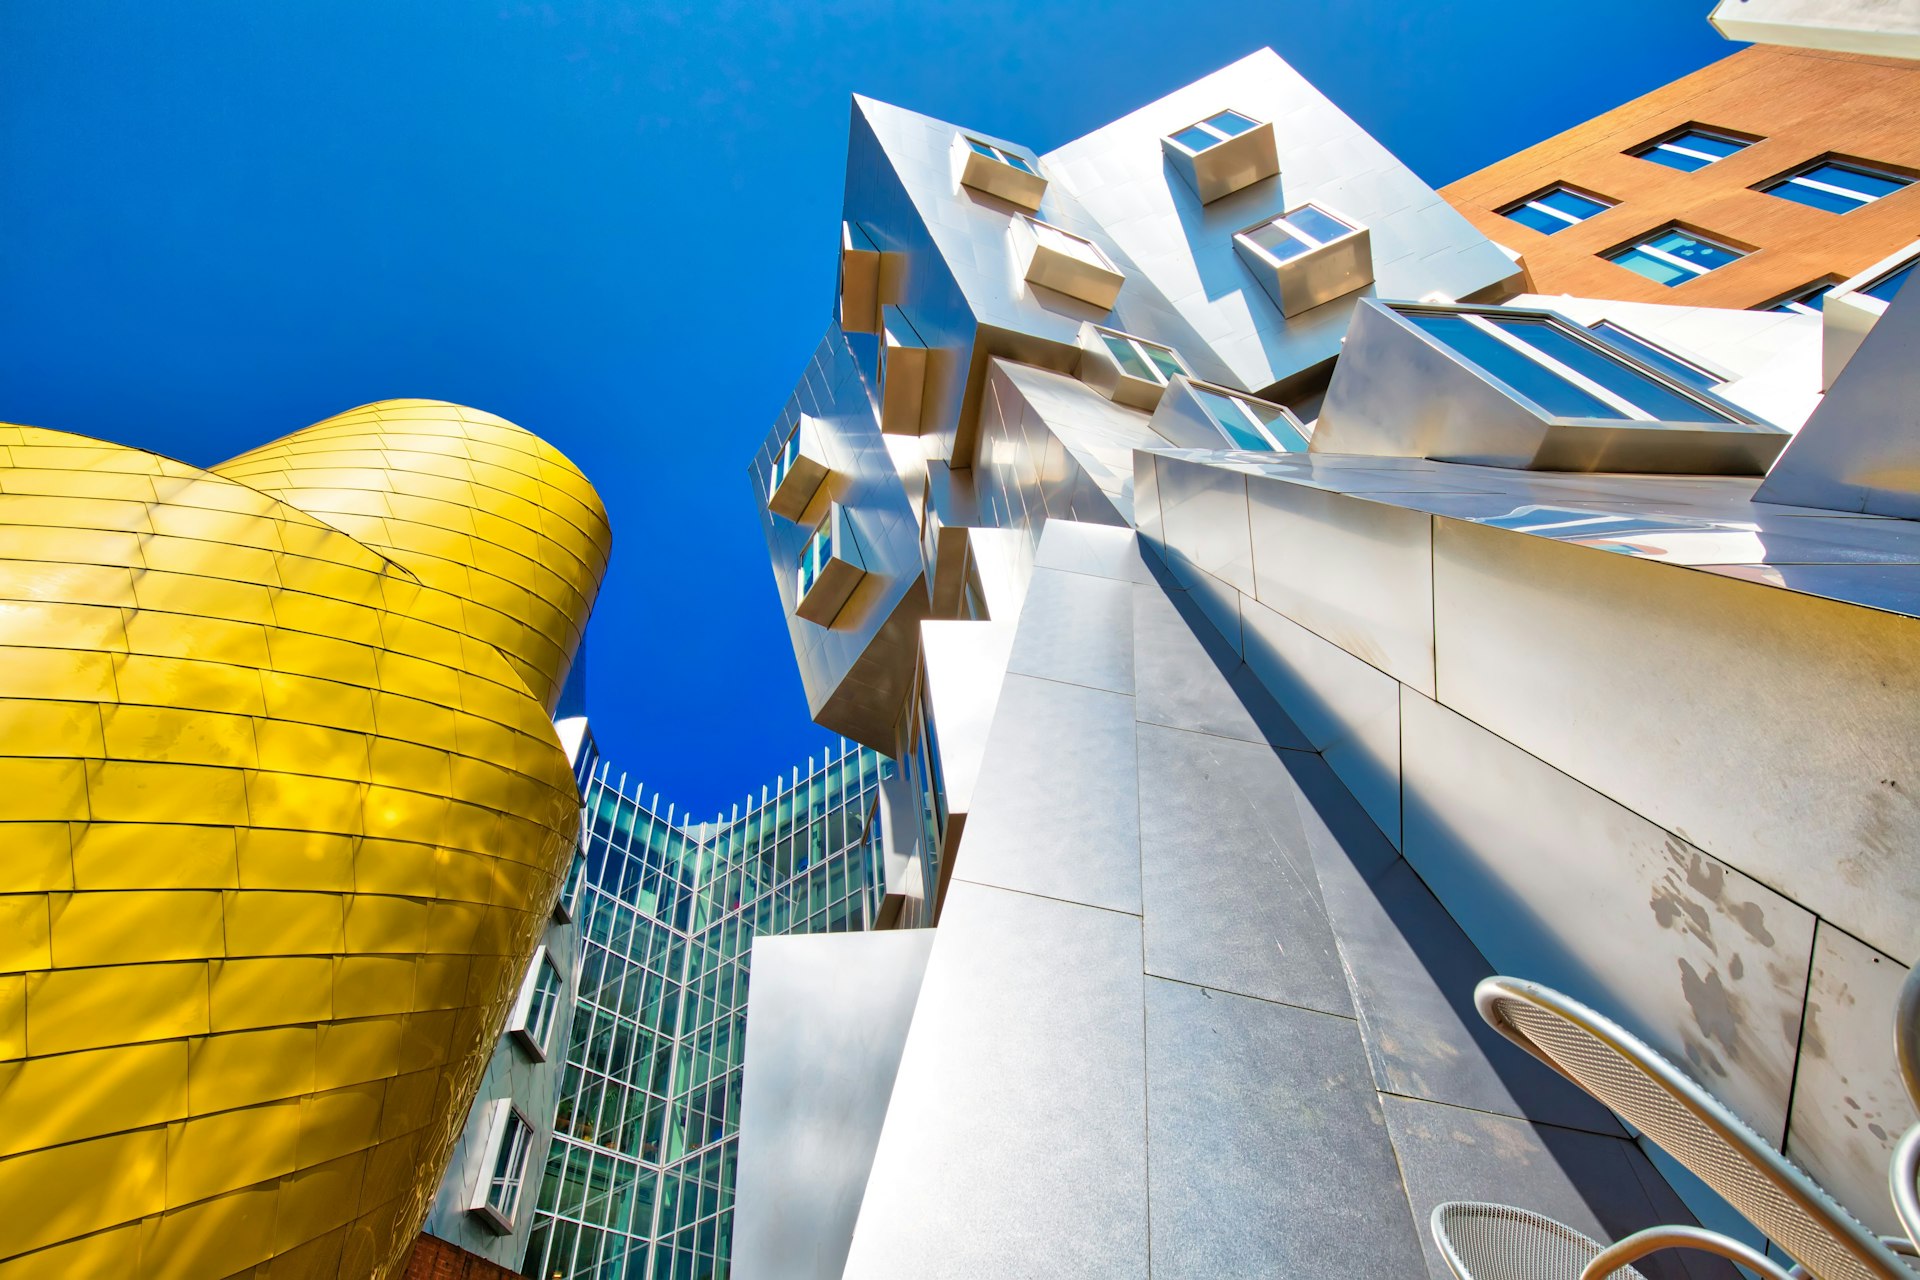 Low-angle view of the Ray and Maria Stata Center at MIT (Massachusetts Institute of Technology), Cambridge, Massachusetts, New England, USA